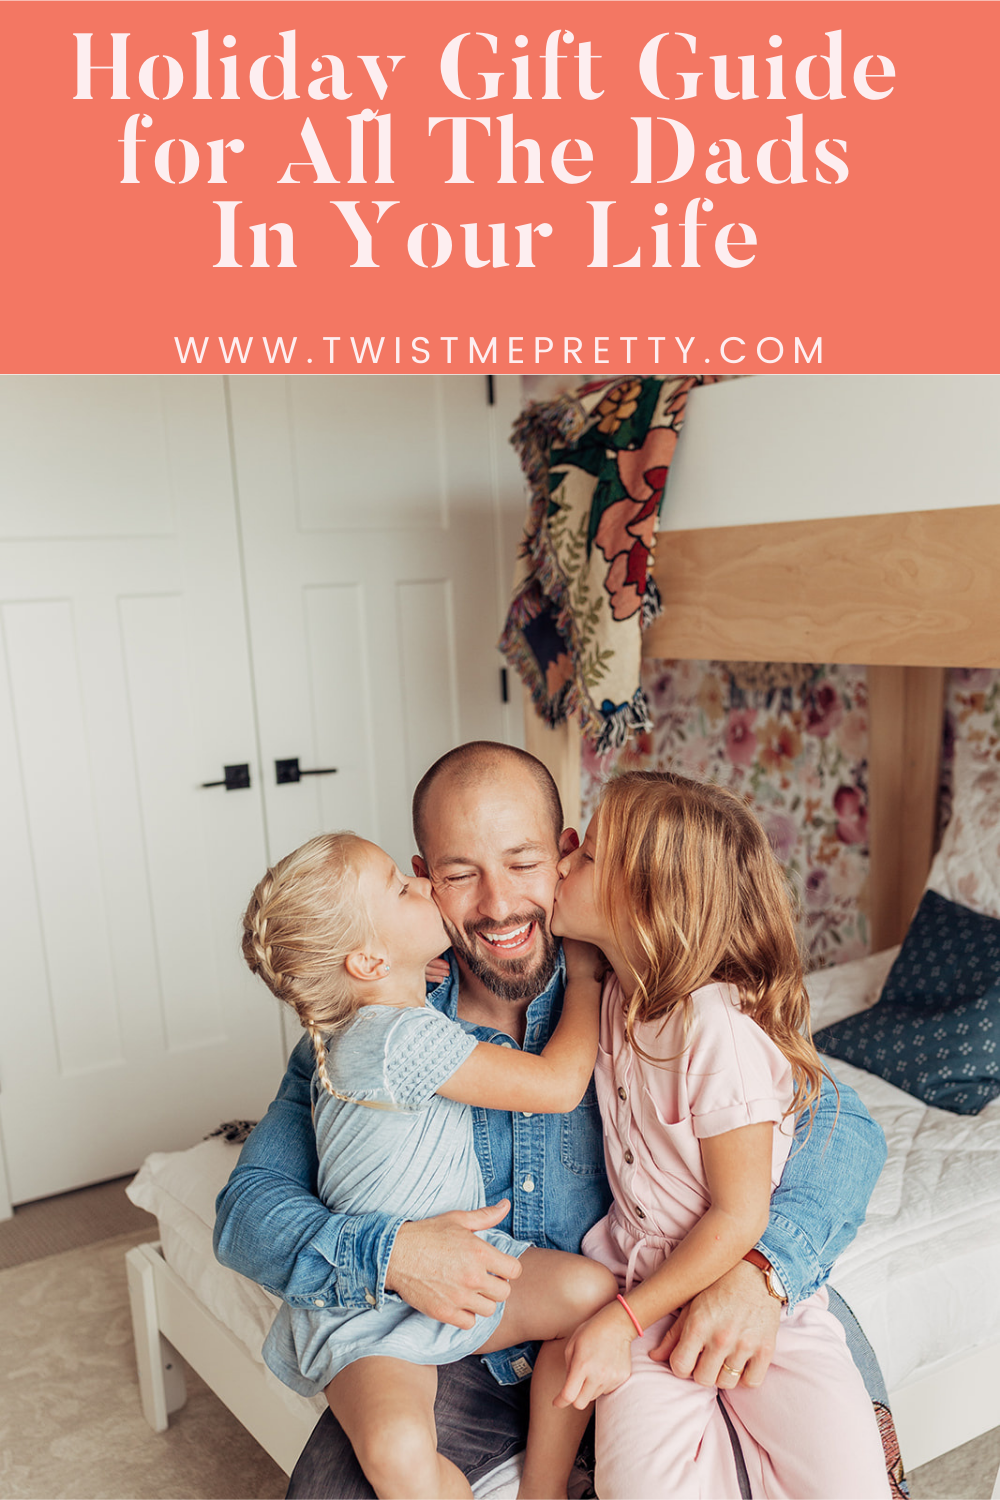 The ultimate dad holiday gift guide. www.twistmepretty.com